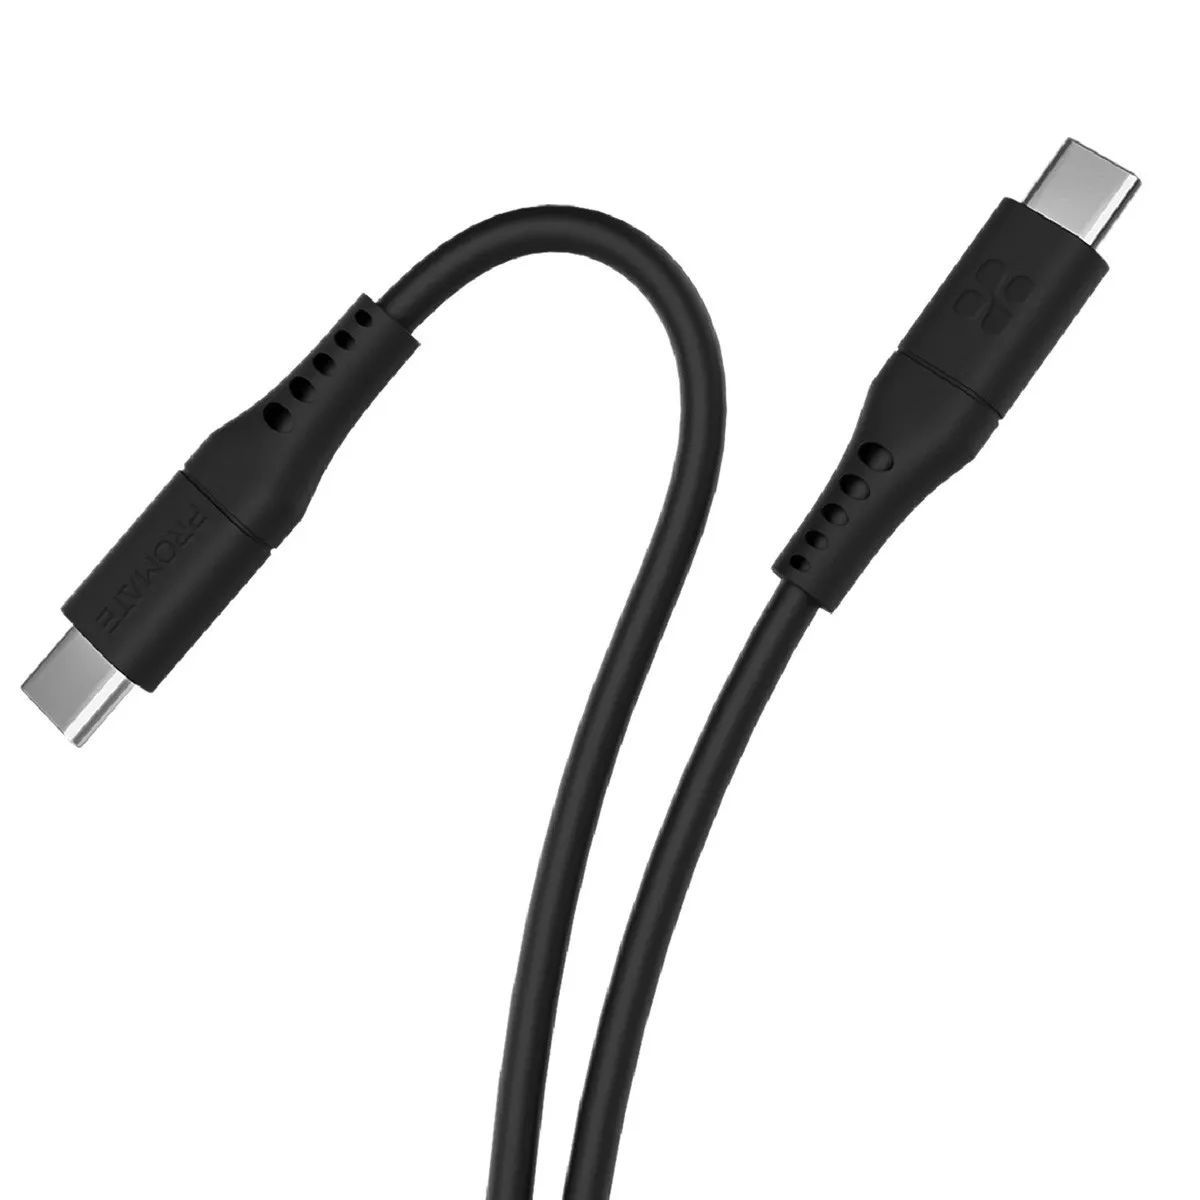 Promate USB-C Cable with 60W PD, 480Mbps Data Transfer and 200cm Silicone Cord, PowerLink-CC200 Black